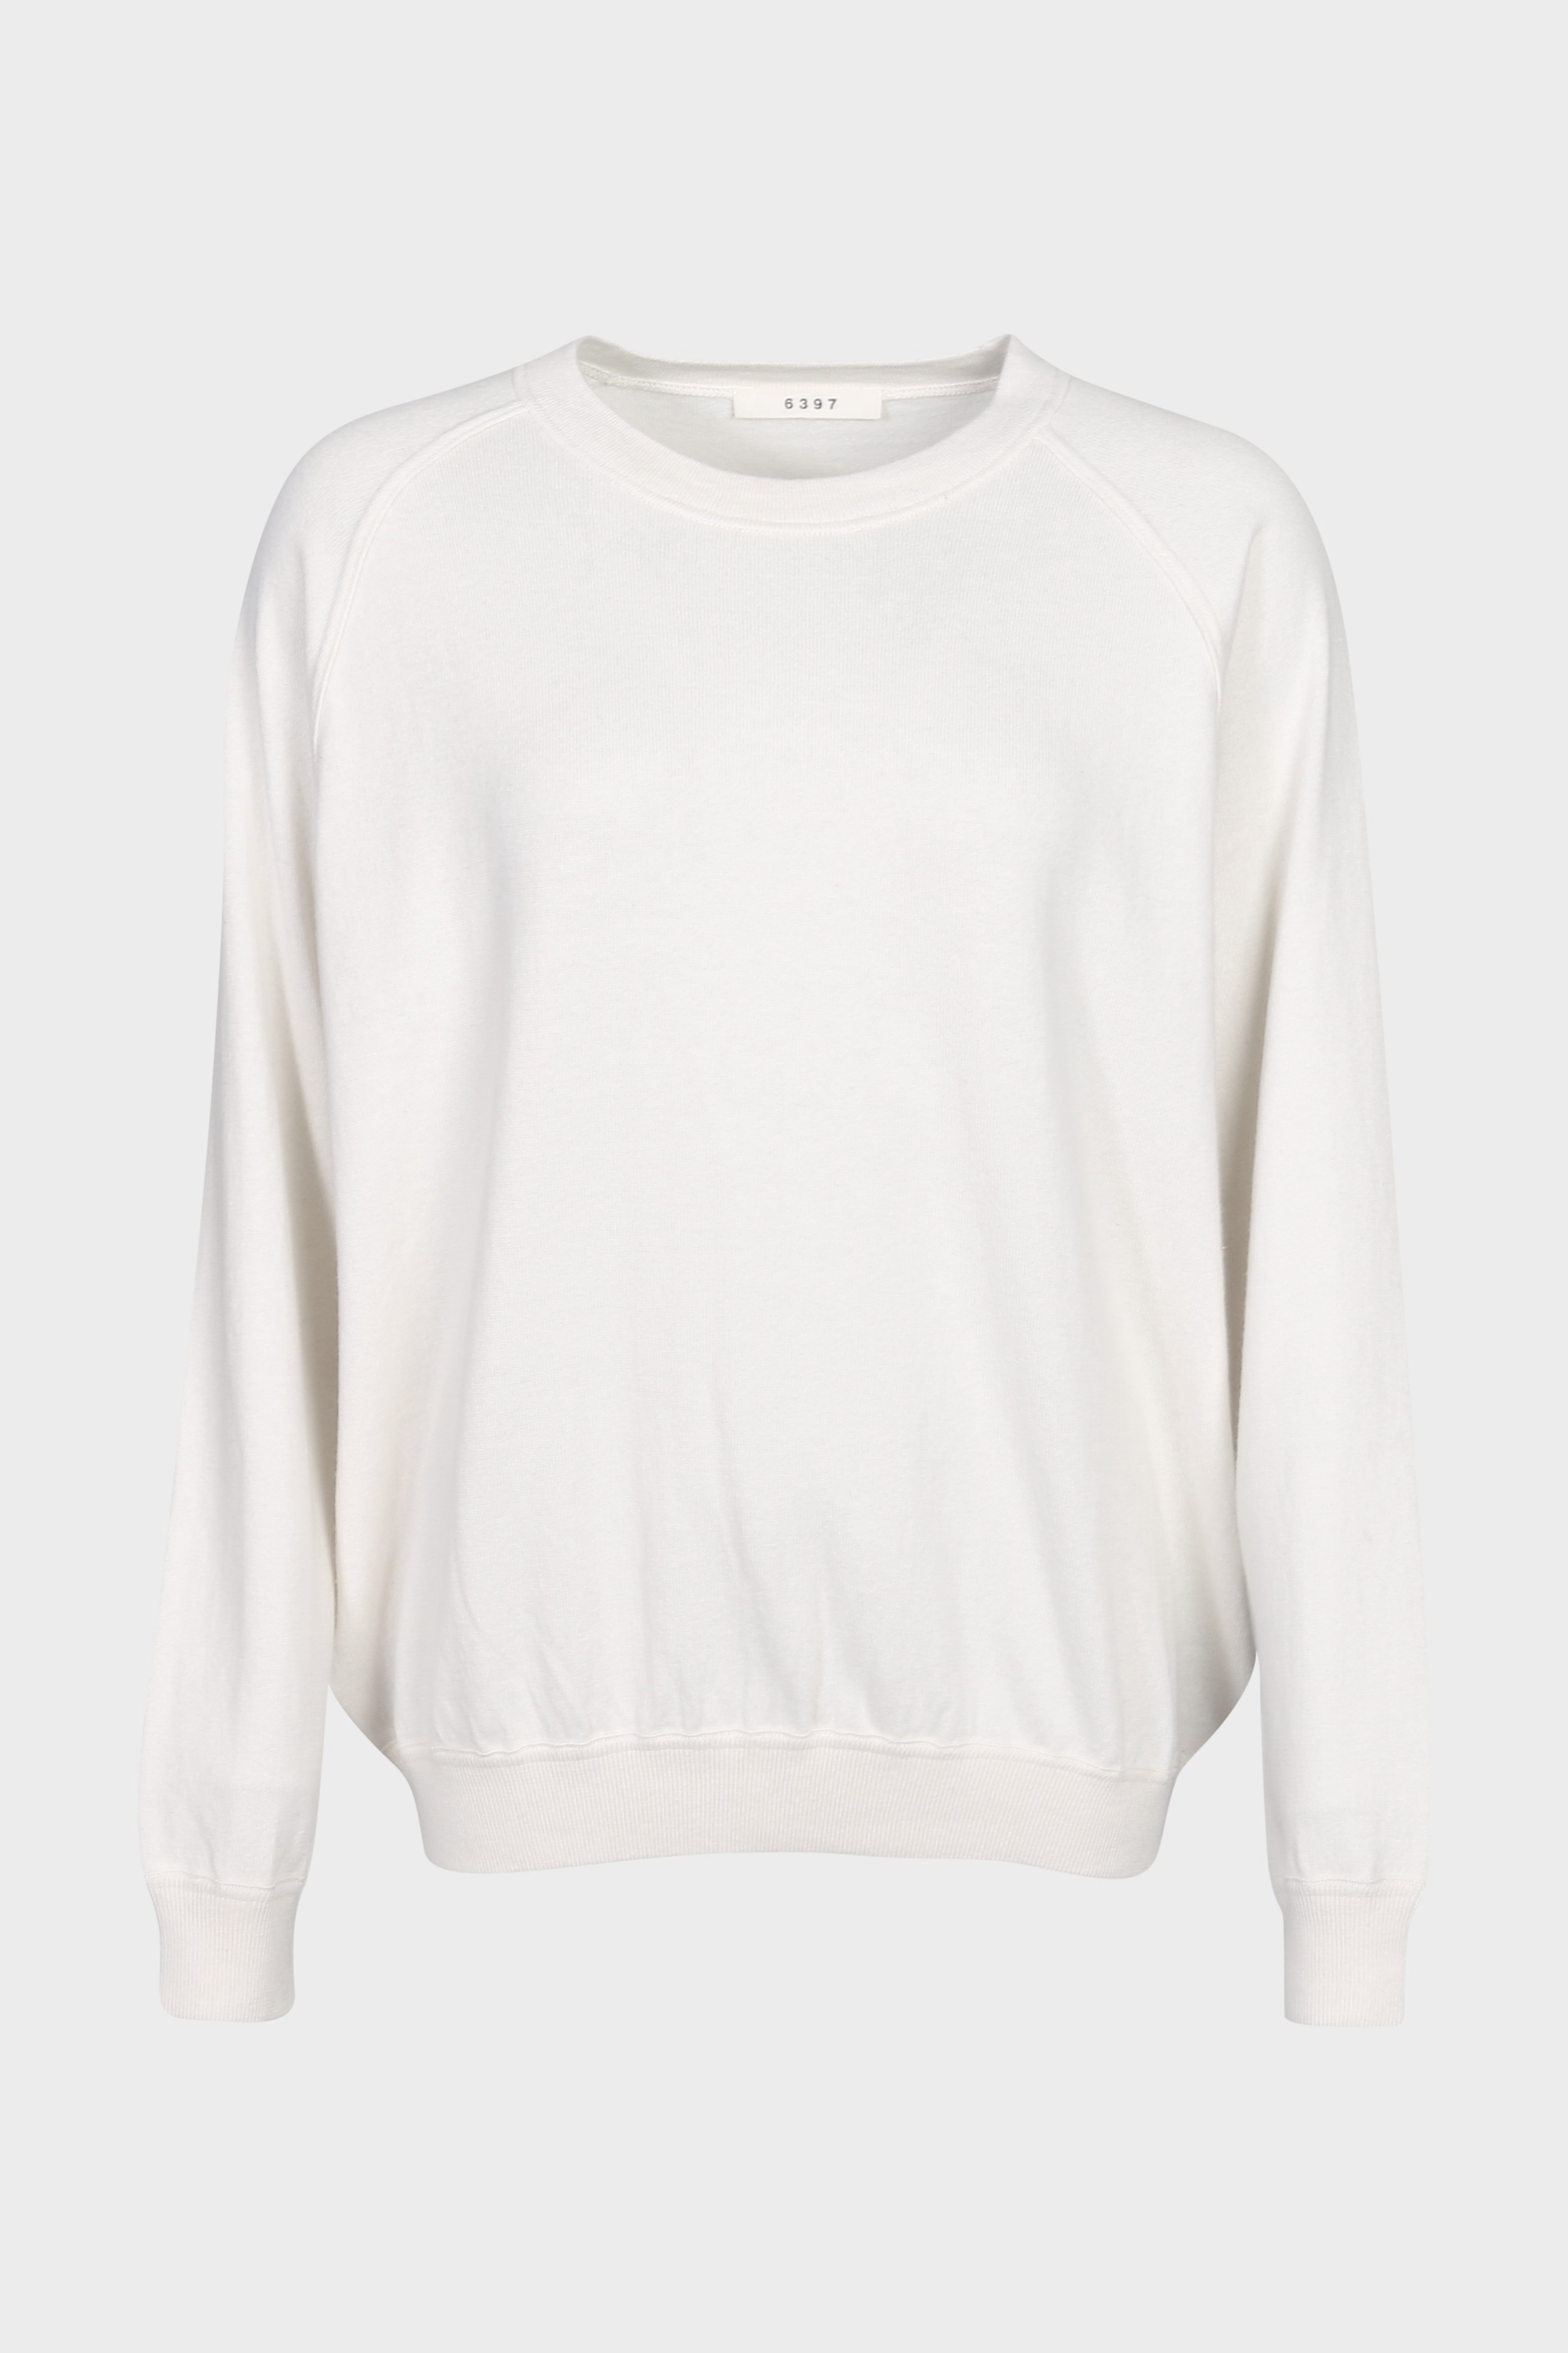 6397 Knit Pullover in Ivory S